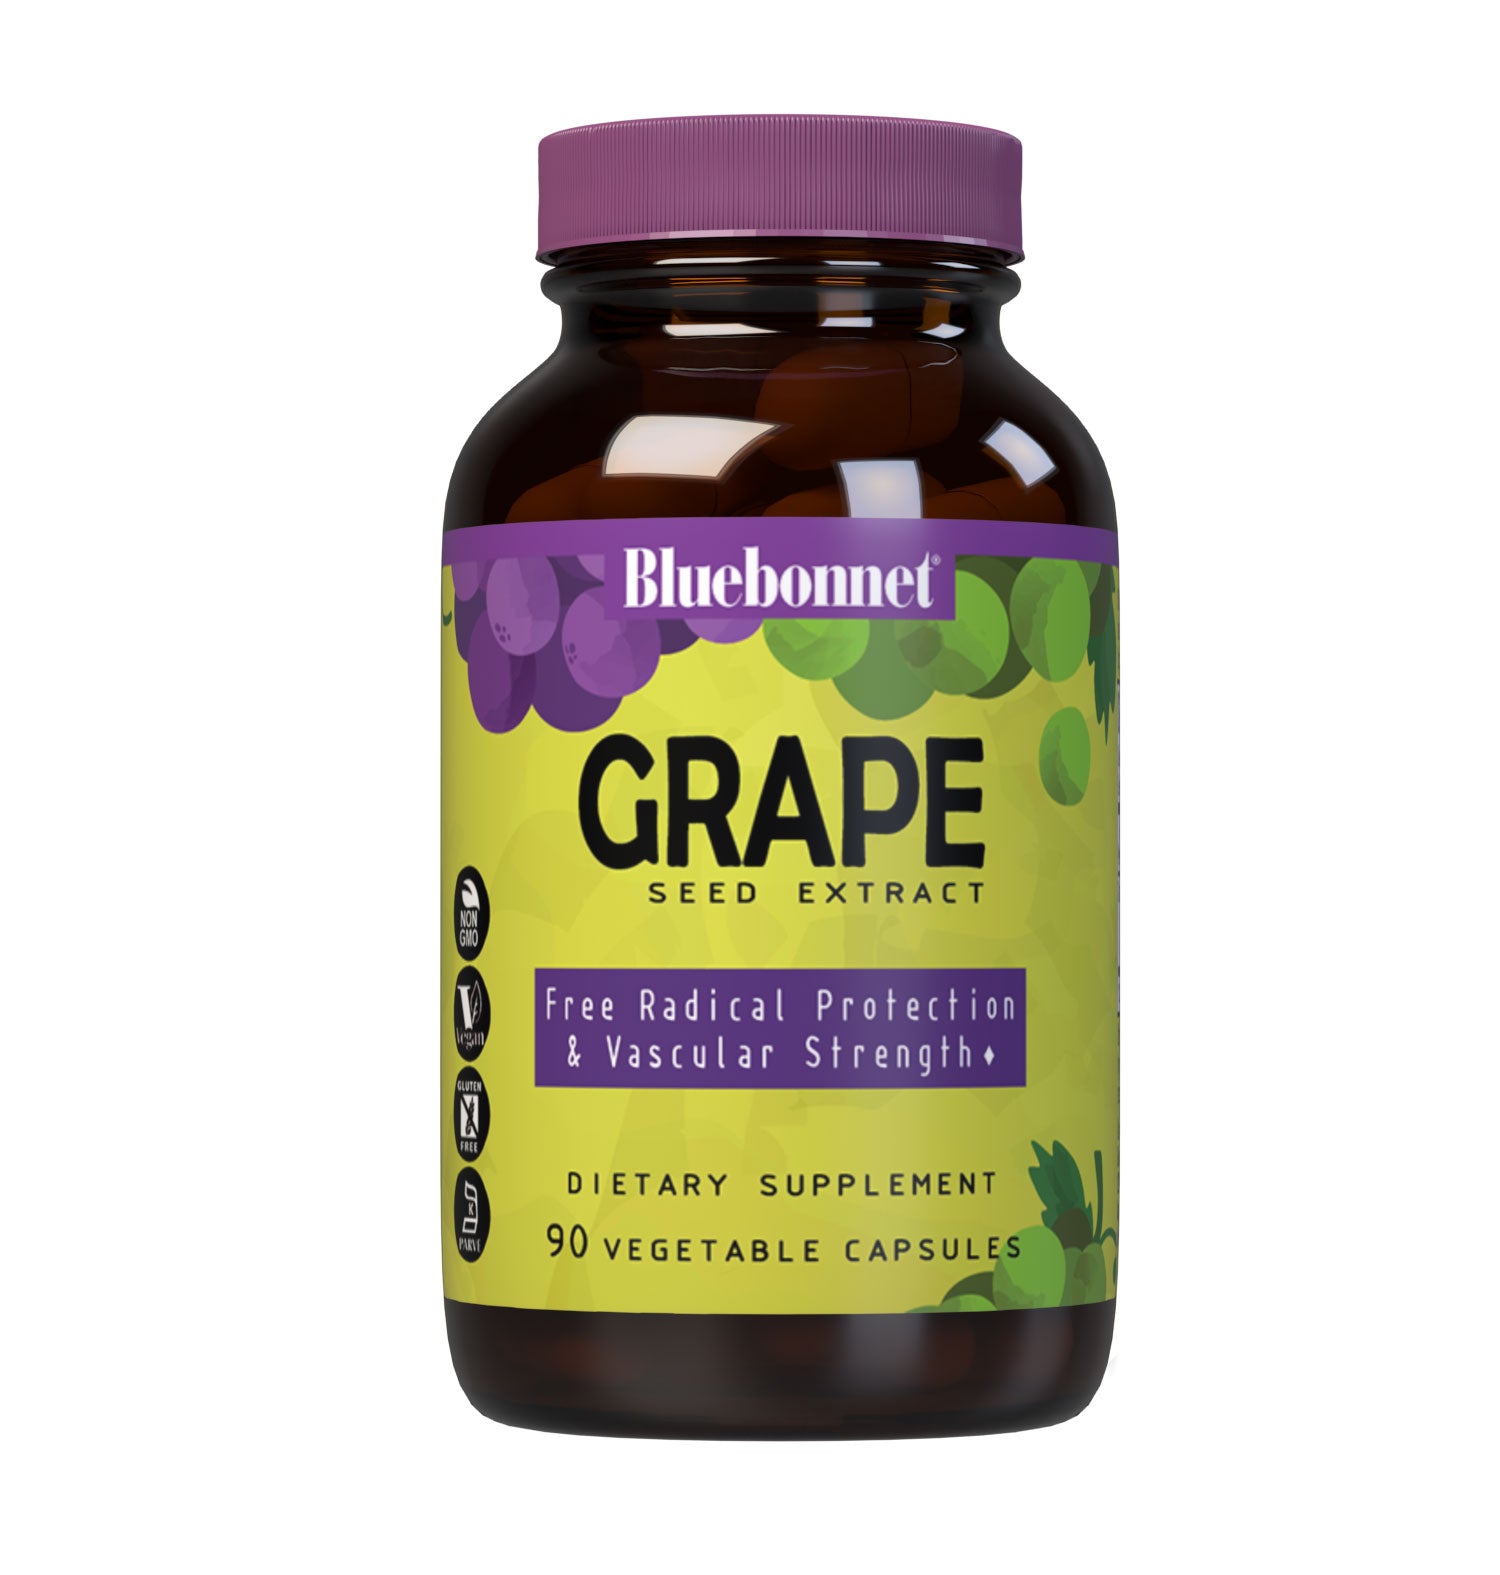 Bluebonnet’s Super Fruit Grape Seed Extract 90 Vegetable Capsules are derived from Champagne grape seeds imported from France. These special grape seeds are turned into an extract known as Leucoselect supplying 100 mg per serving of grape seed extract standardized to 95% total polyphenols including oligomeric proanthocyanidins, monomeric polyphenols and flavonoids. These potent active constituents help support circulatory health and protect against the damaging effects of free radicals. #size_90 count